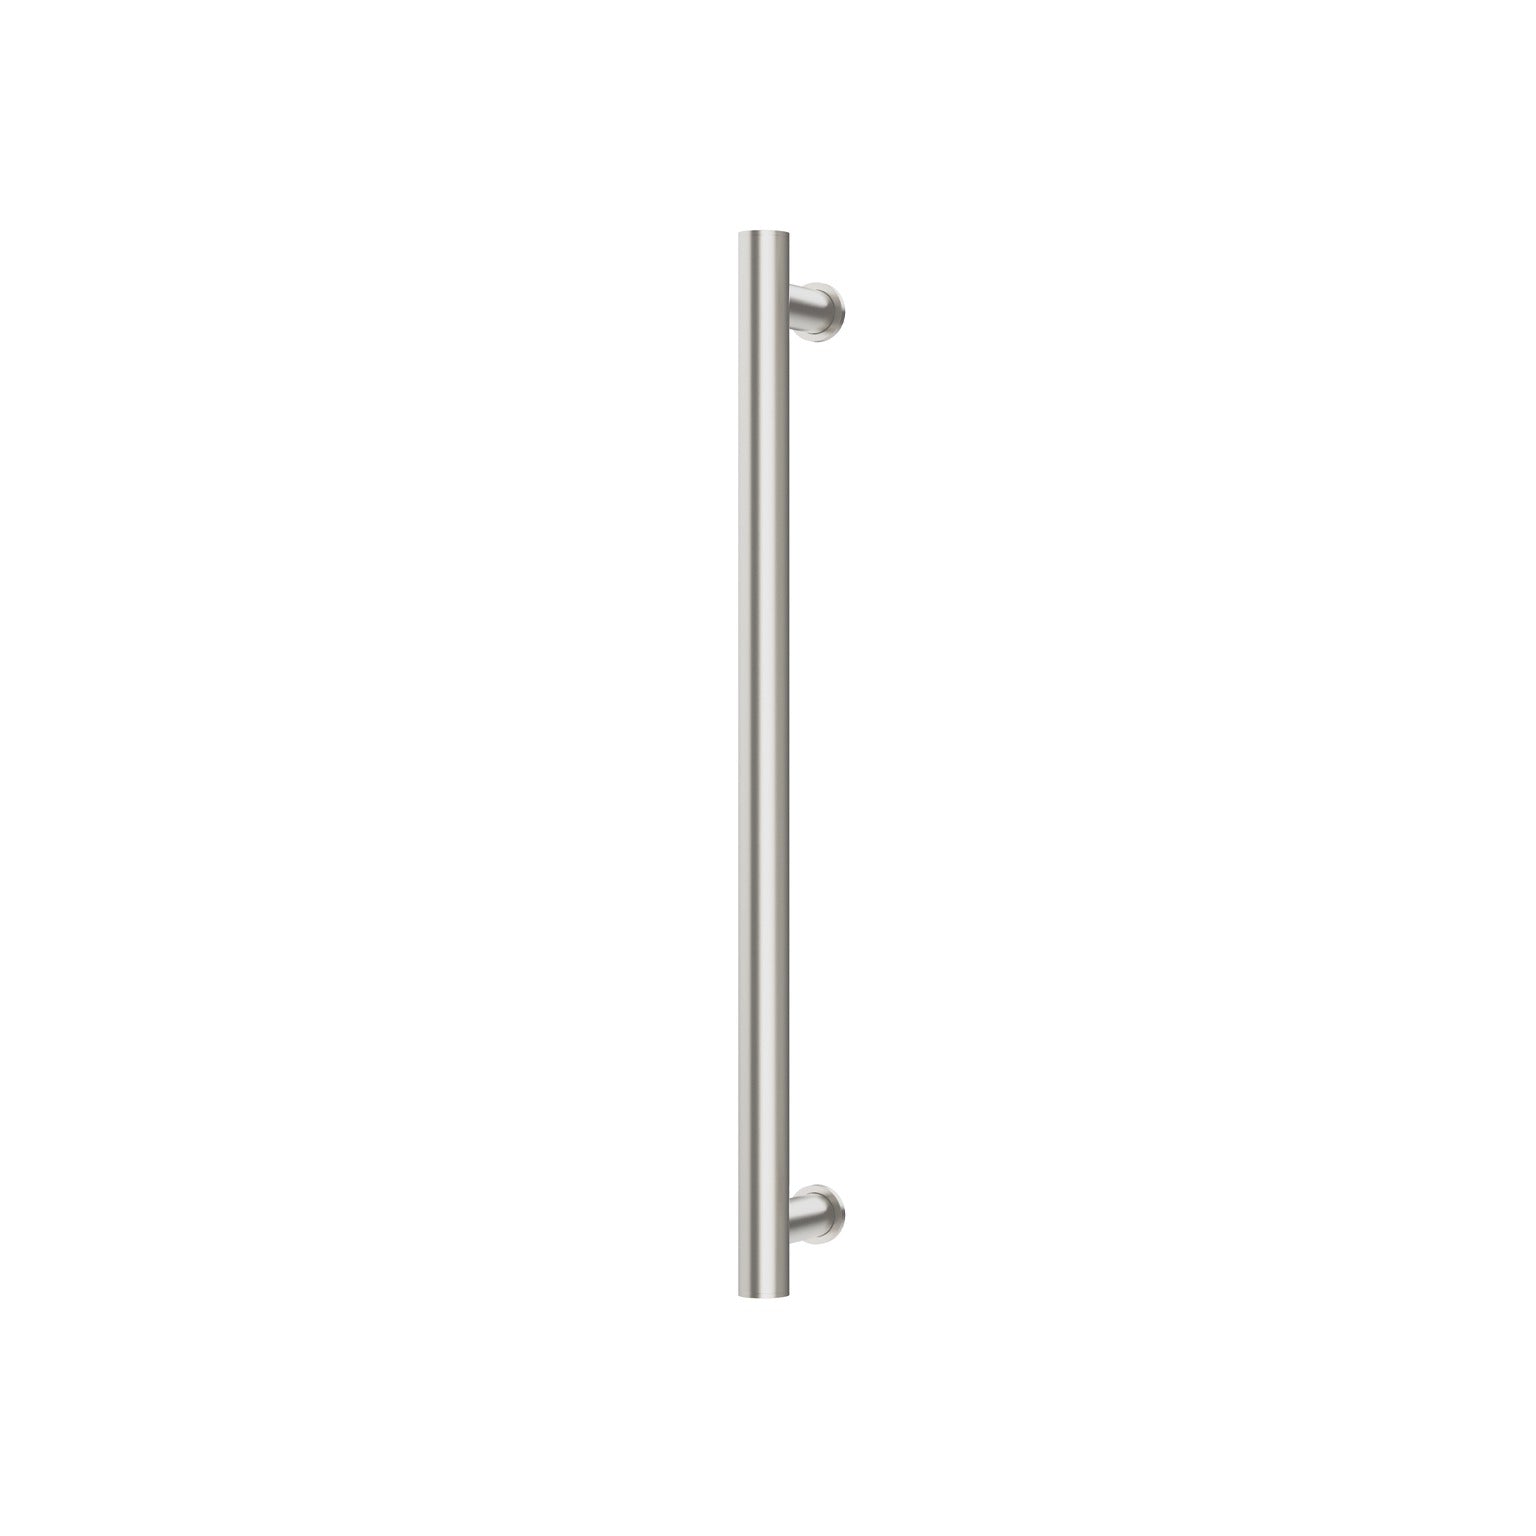 PHOENIX ROUND SINGLE HEATED TOWEL RAIL BRUSHED NICKEL (AVAILABLE IN 600MM AND 800MM)